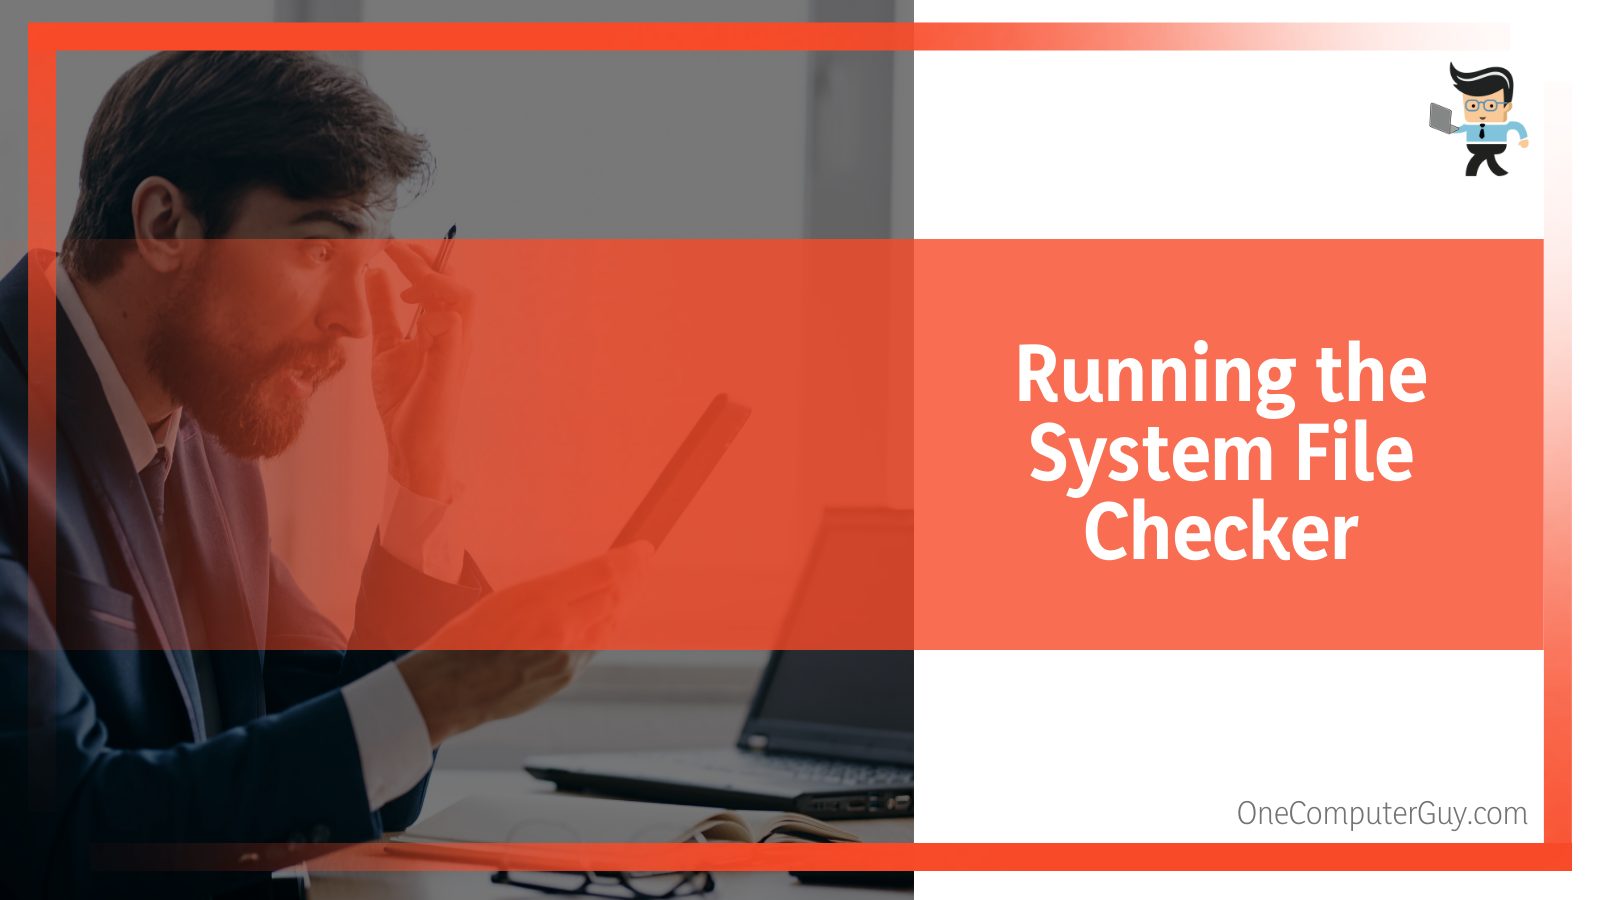 Running the System File Checker